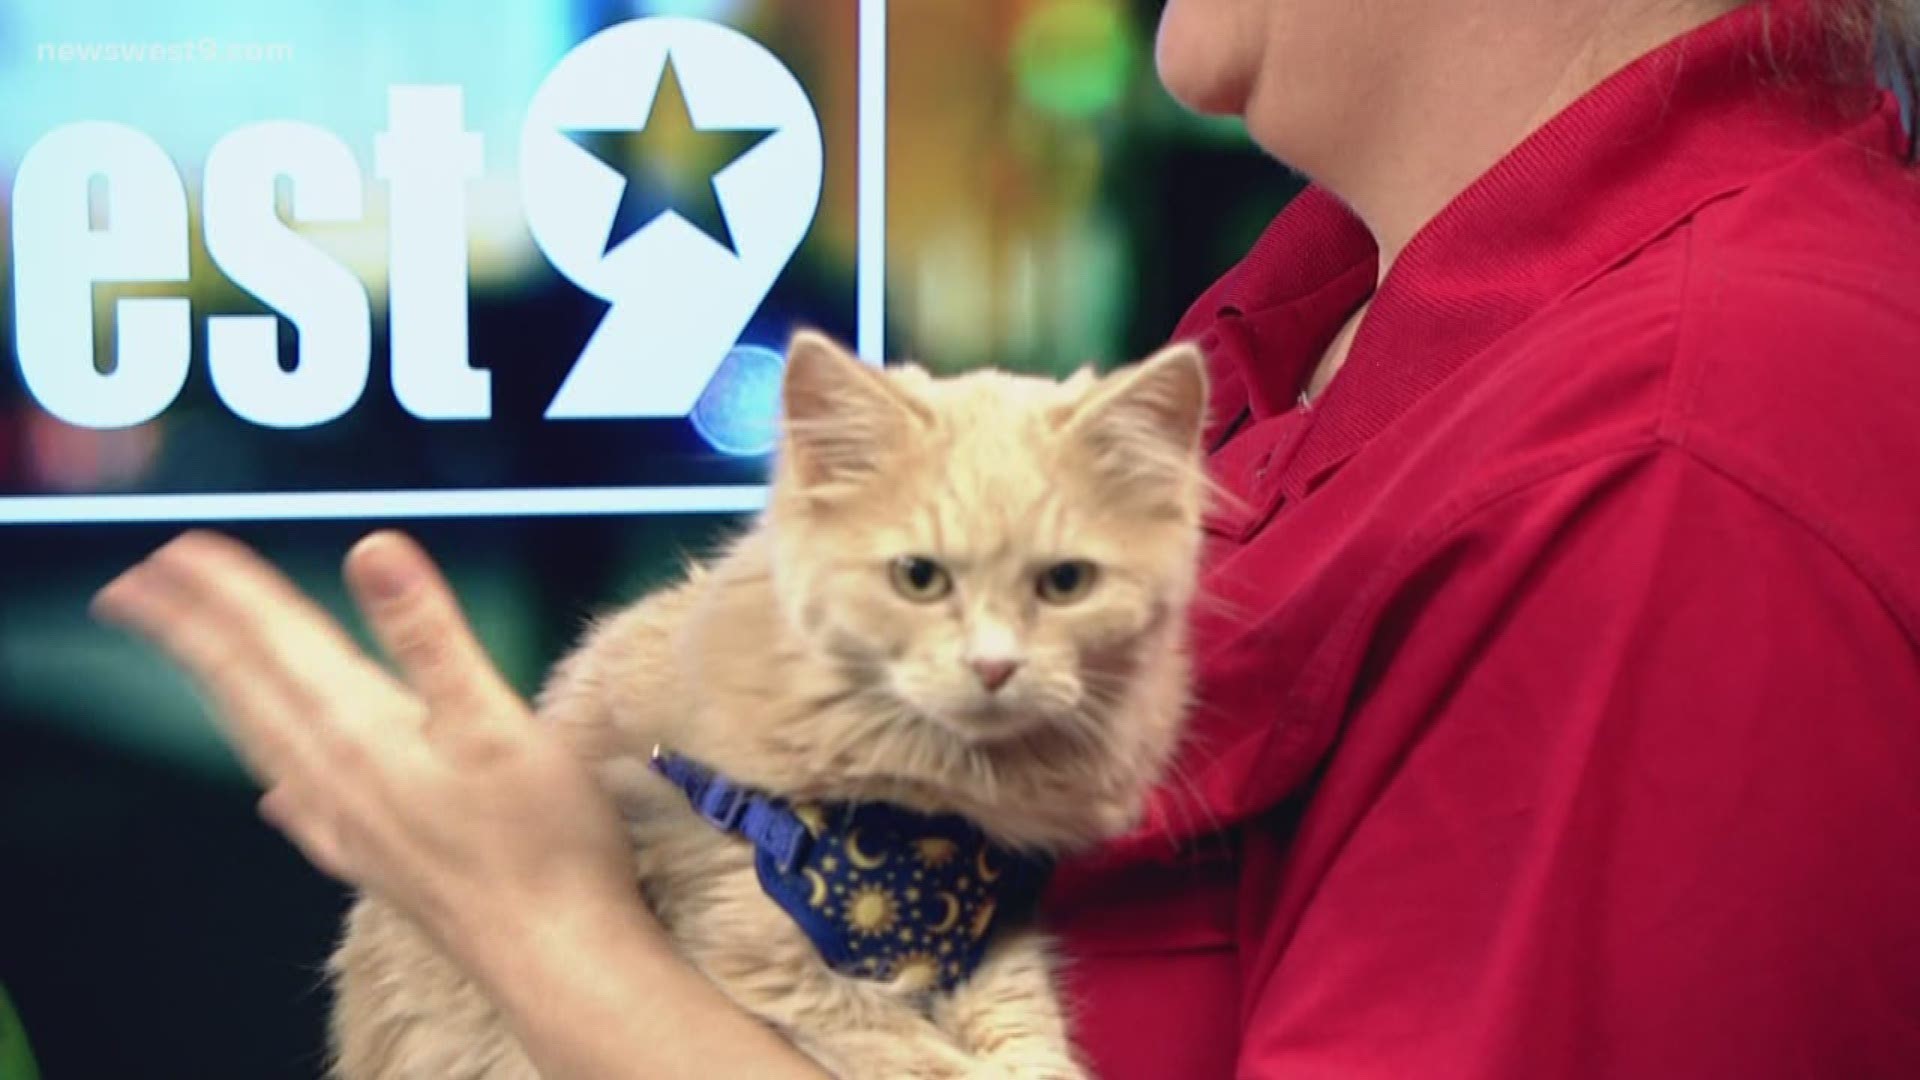 Meet Cream Puff, our Pet of the Week courtesy of the Midland Humane Coalition!